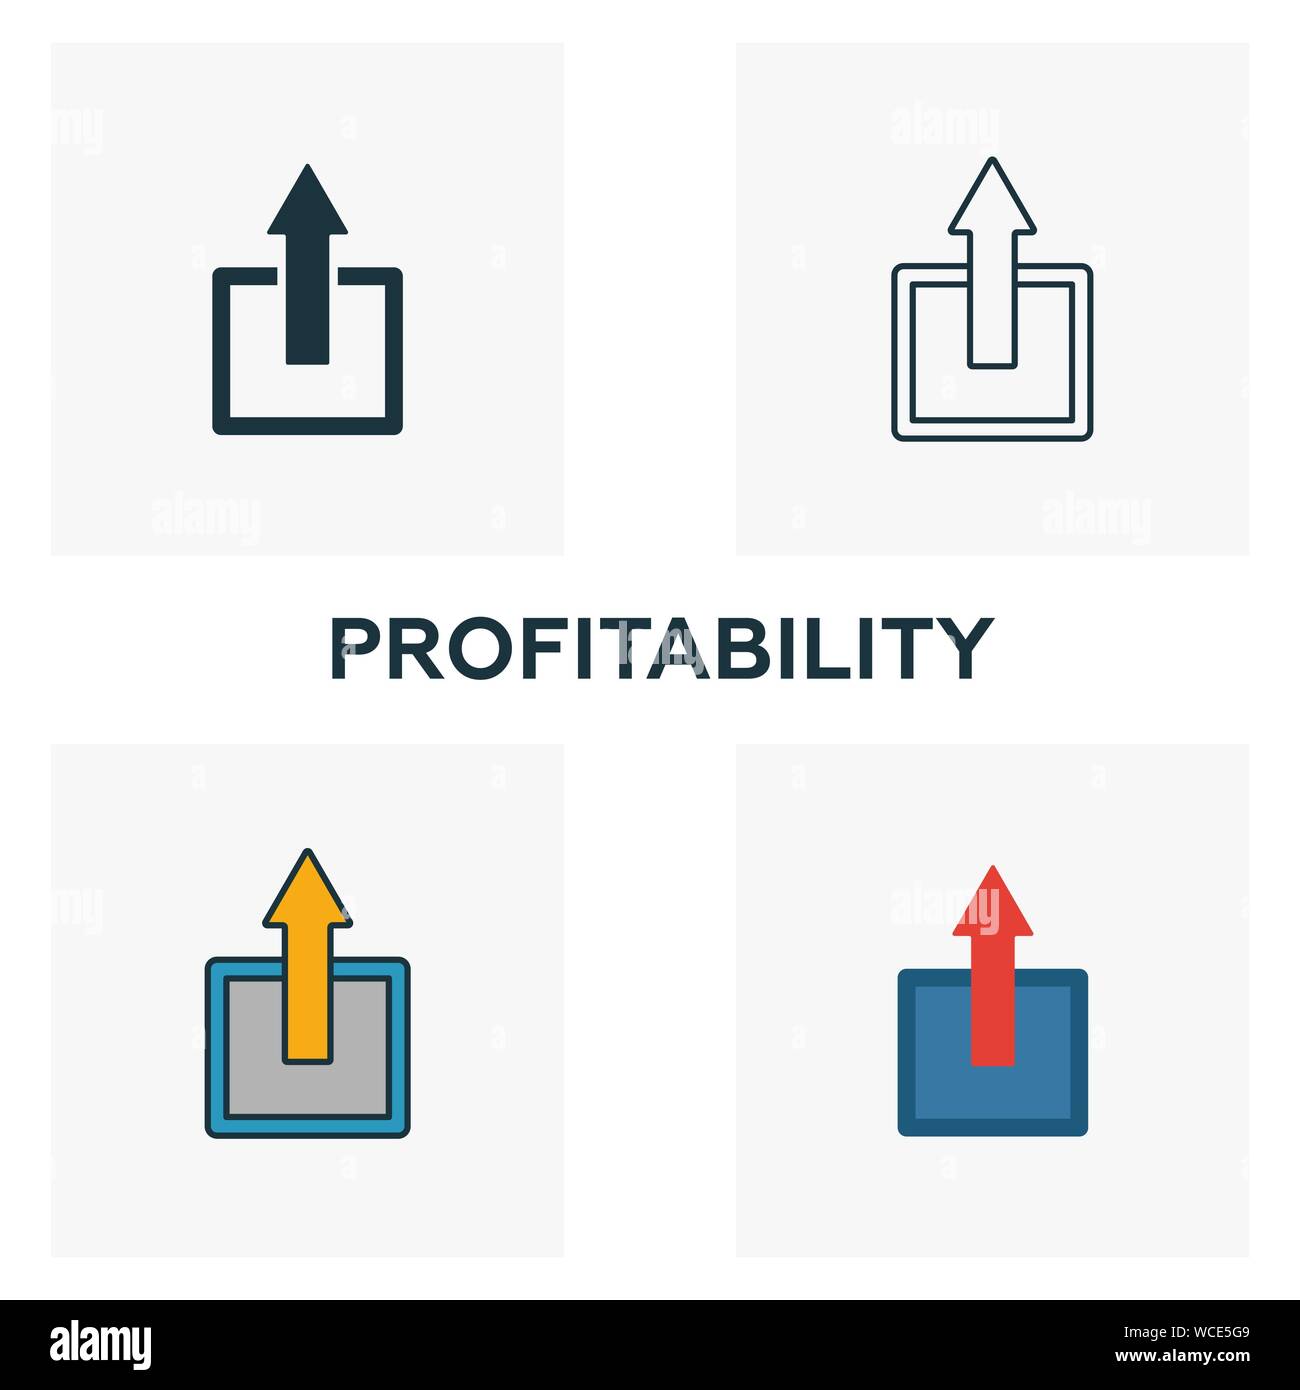 Profitability icon set. Four elements in diferent styles from business ethics icons collection. Creative profitability icons filled, outline, colored Stock Vector